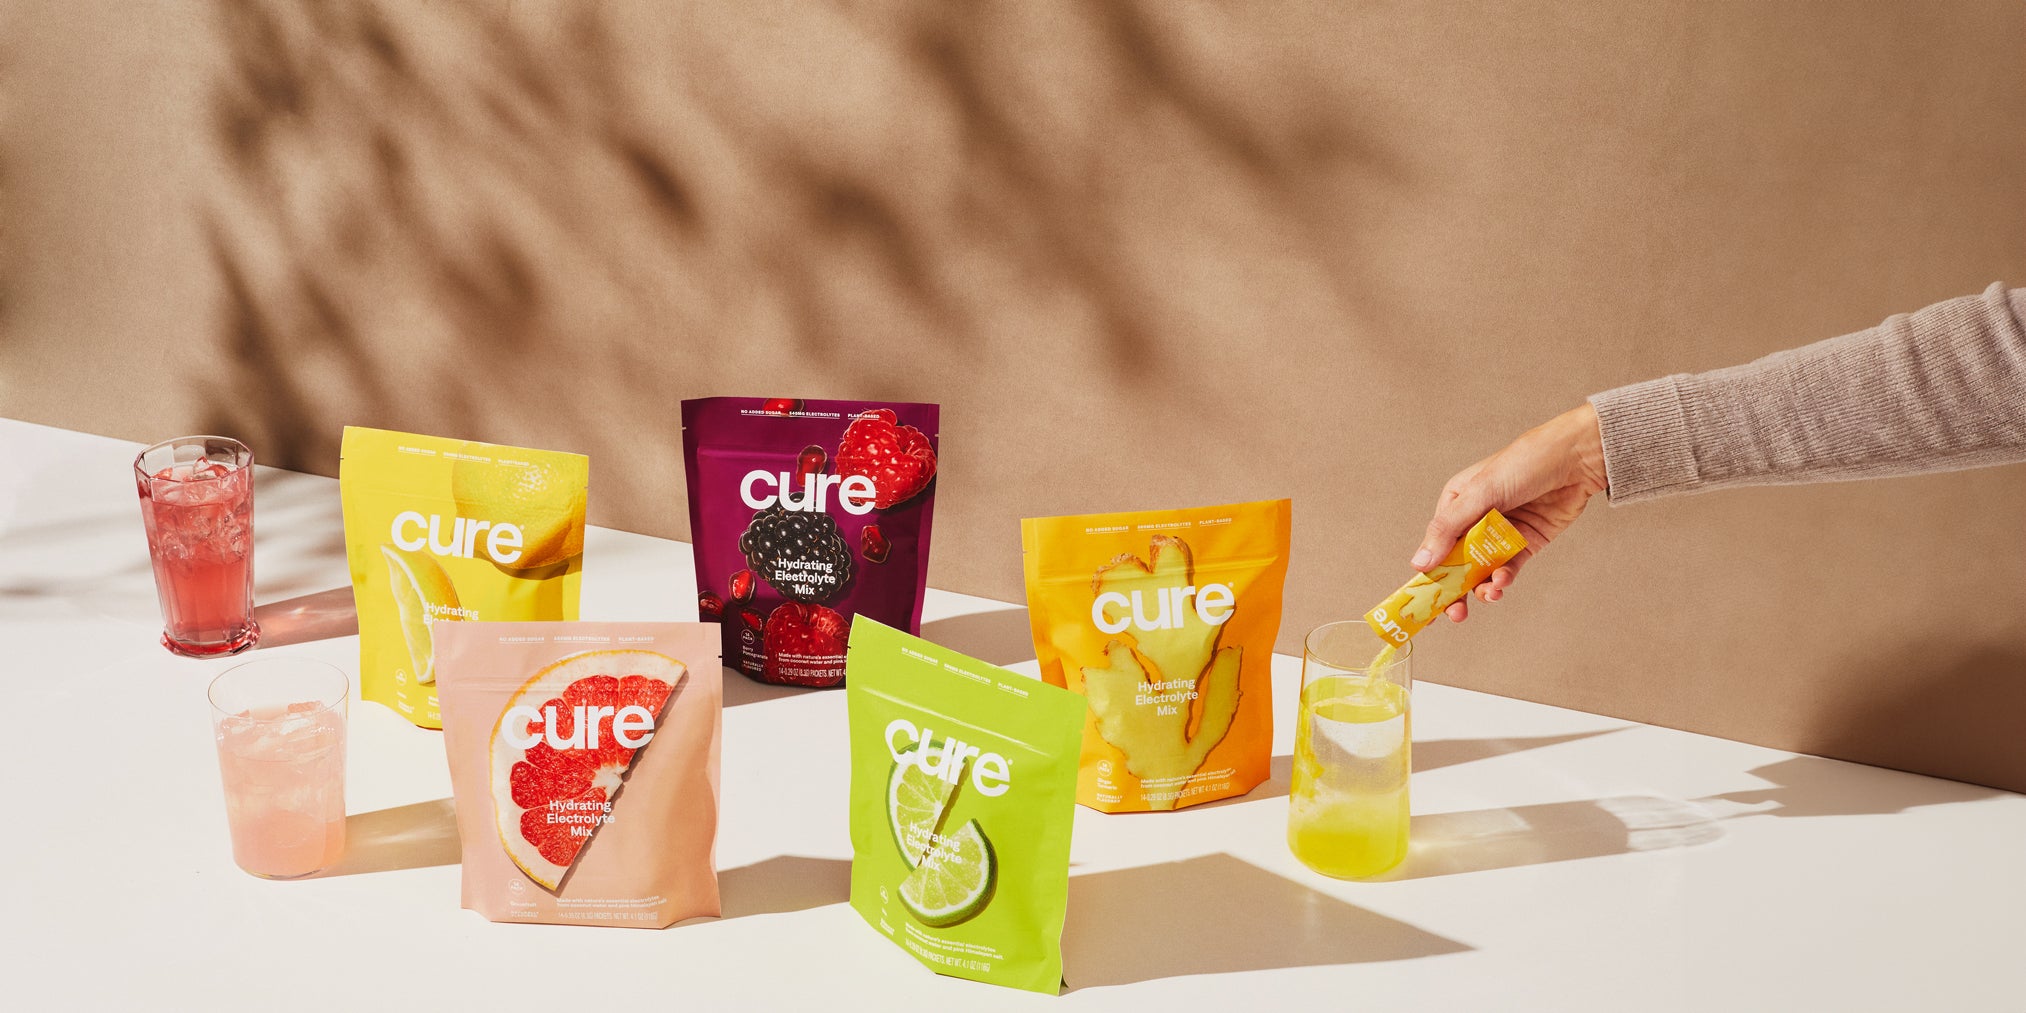 'Cure' electrolyte packets and drinks with a hand pouring a yellow mix, neutral backdrop.